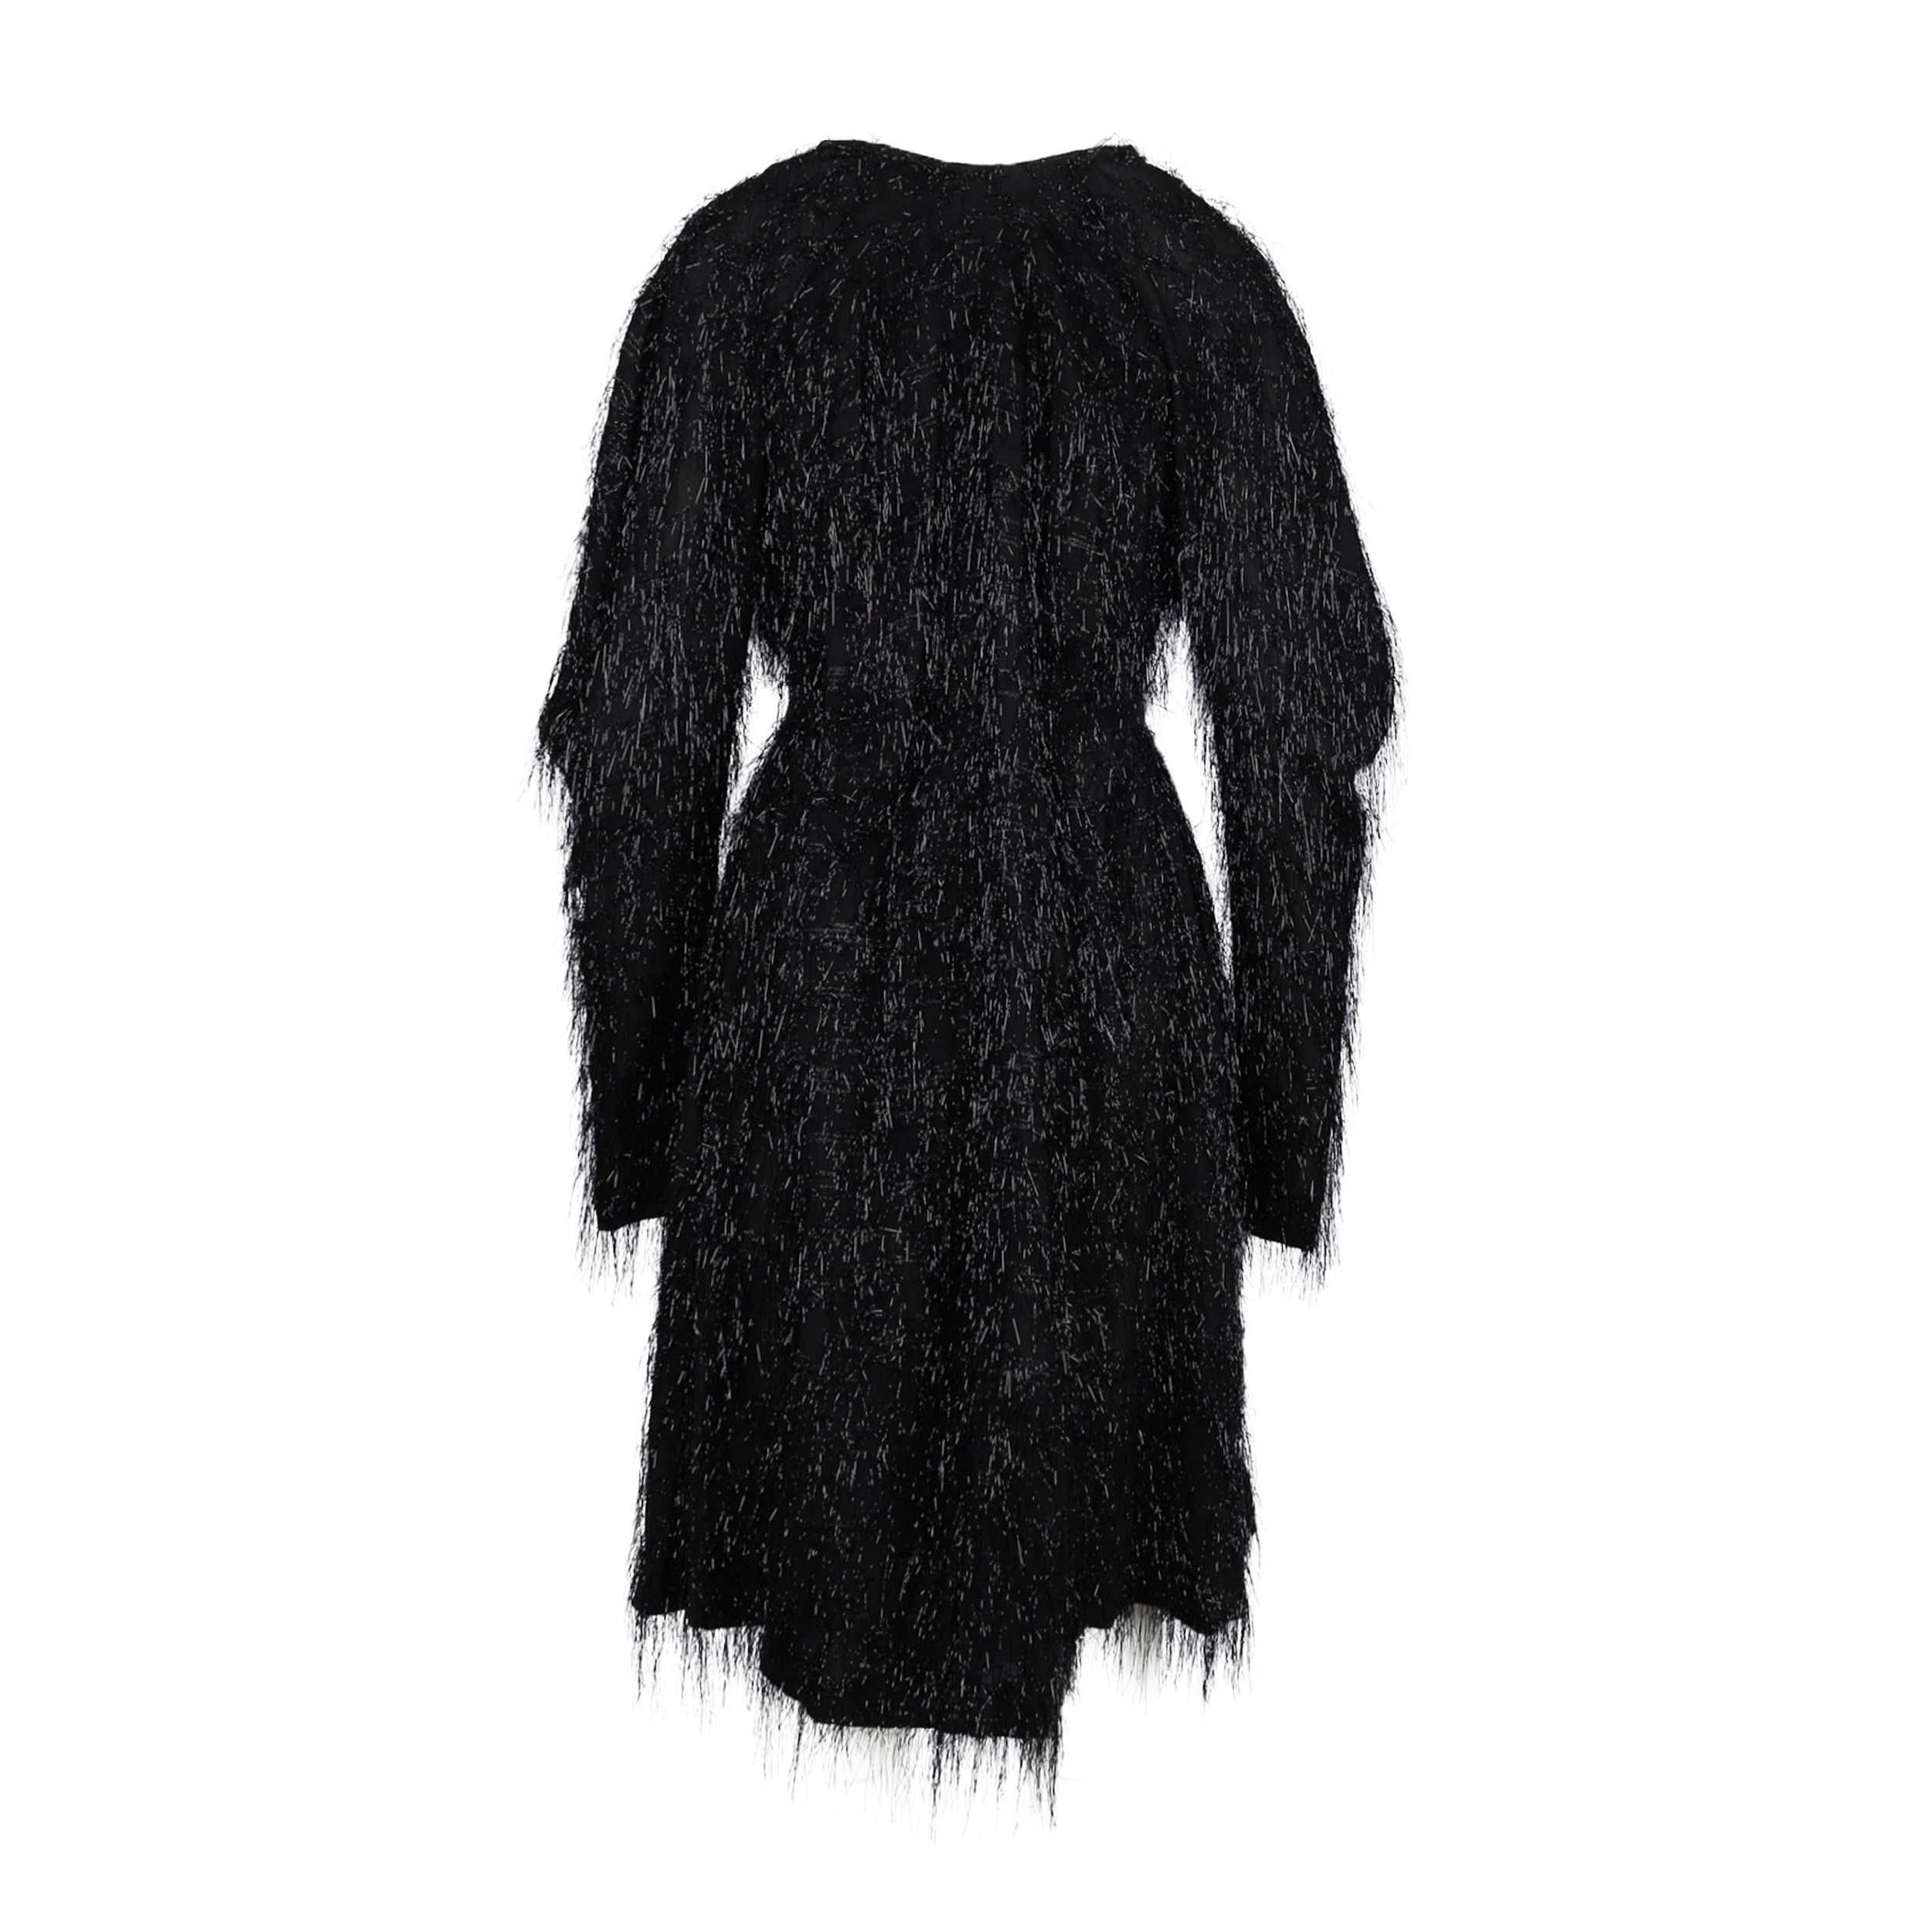 Strike a balance between modern glamour and unconventional chic with this Vivienne Westwood black dress with glitter fringes. Part of the special collection, this chiffon piece is further embellished with minimal shimmer strokes and can be tightened